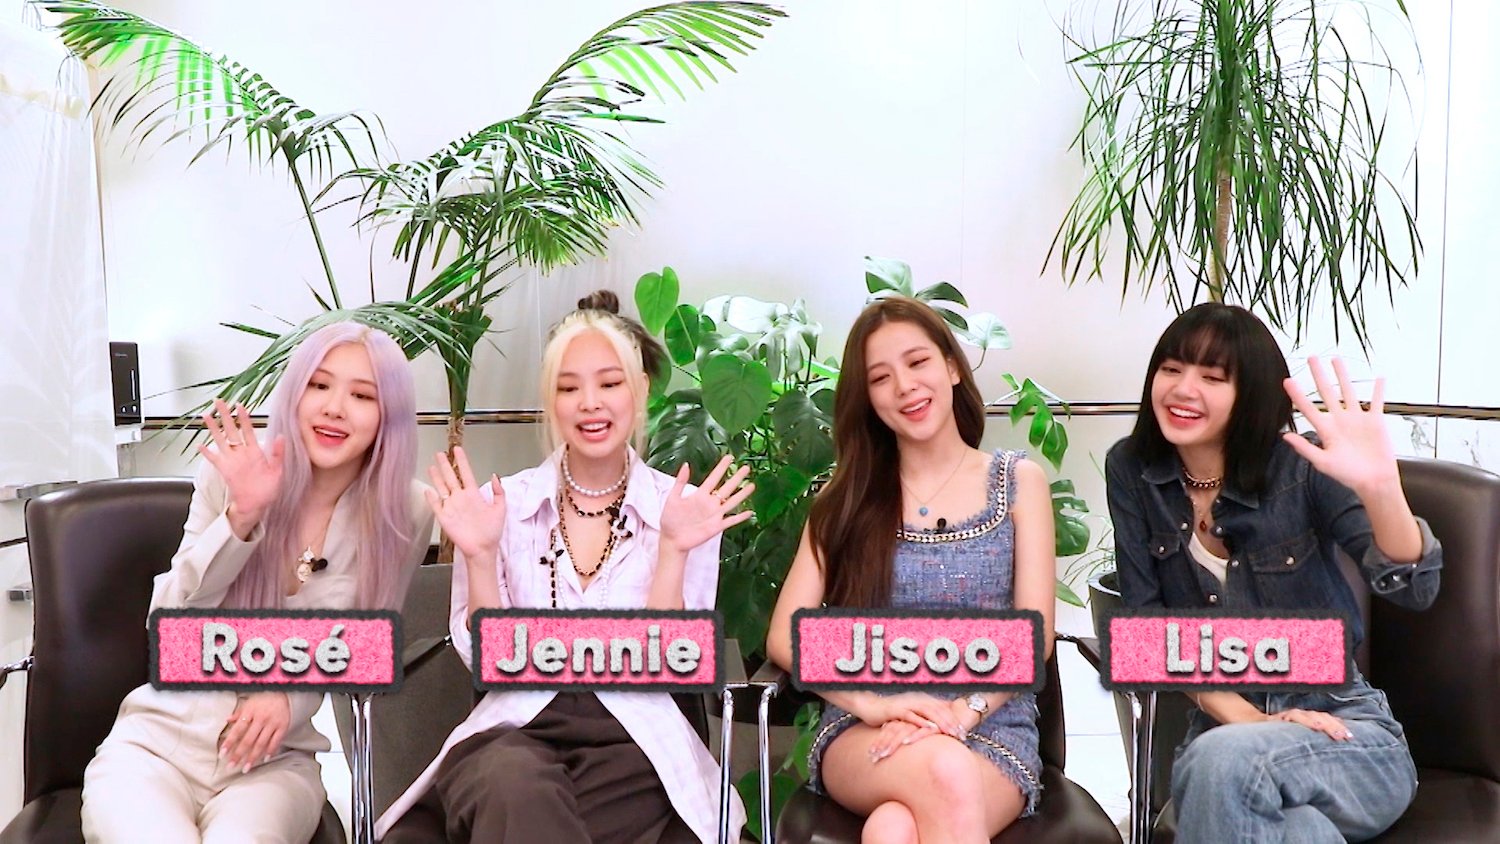 Musical guest Blackpink during an interview on 'The Tonight Show Starring Jimmy Fallon' sitting down together with their names across the bottom